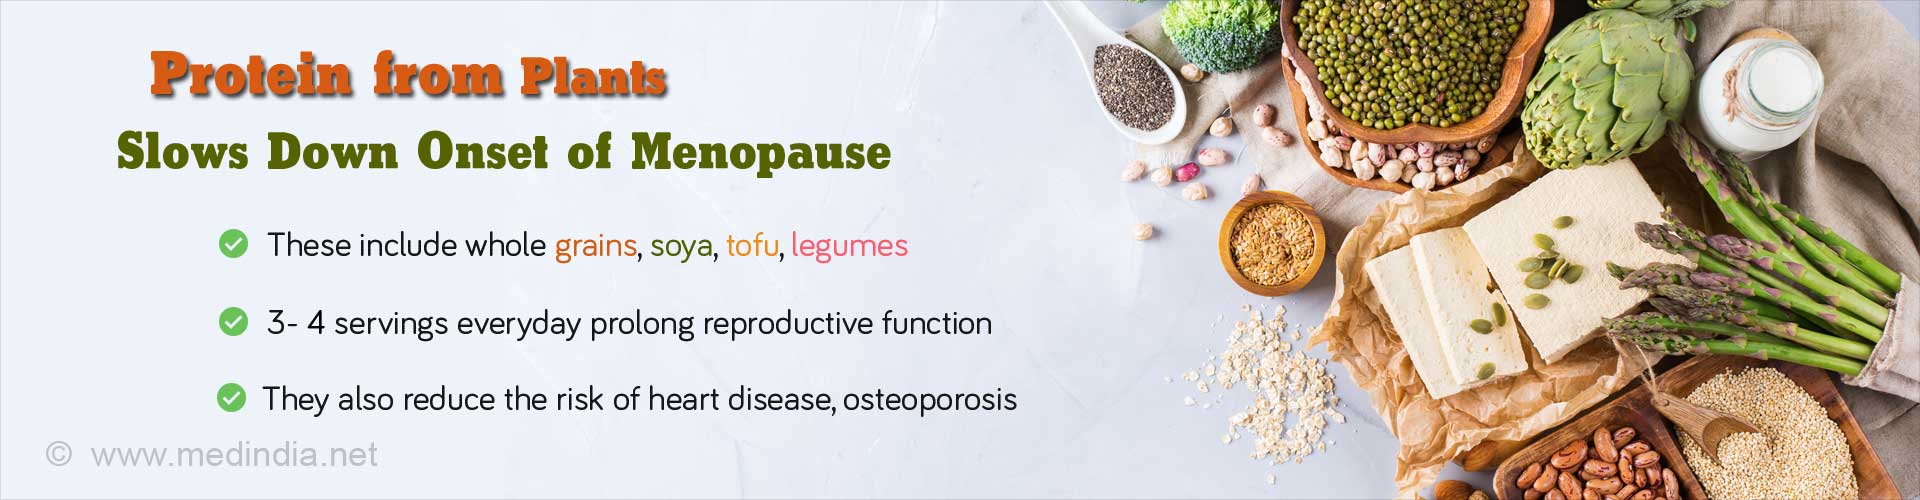 Protein from Plants Slows Down Onset of Menopause
- These include whole grains, soya, tofu, legumes
- 3-4 servings everyday prolong reproductive function
- They also reduce the risk of heart disease, osteoporosis